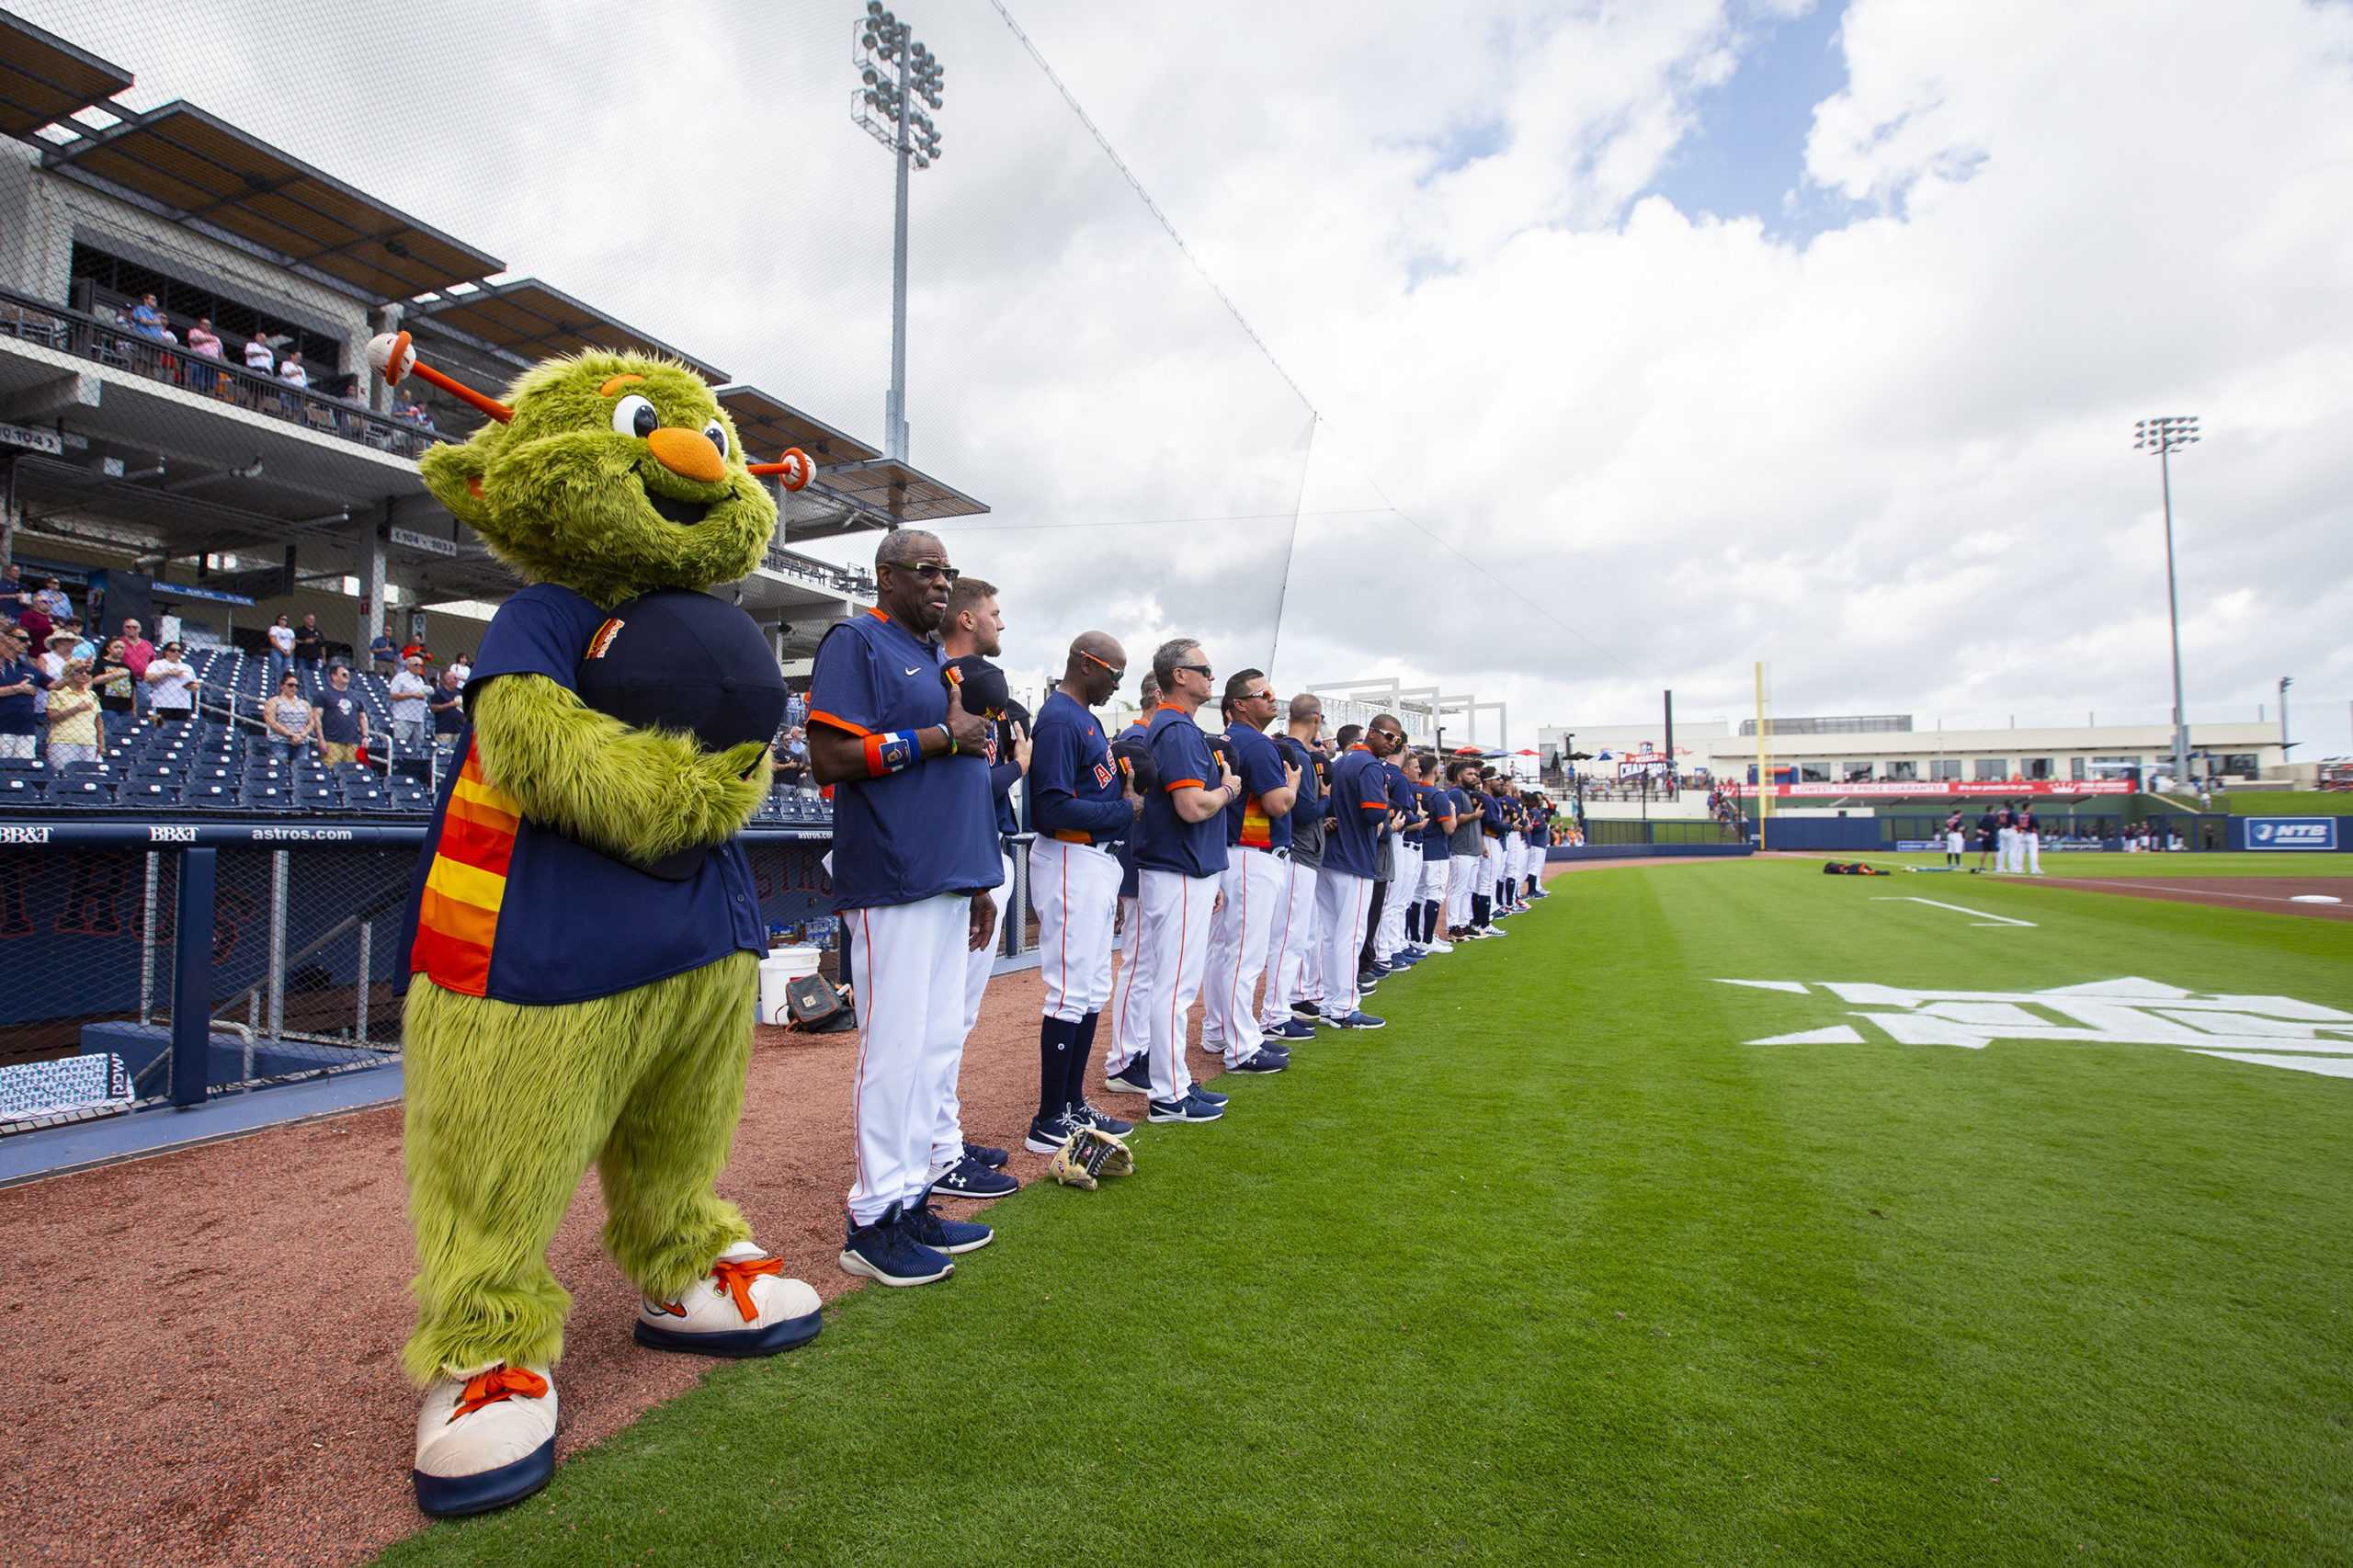 The Houston Astros baseball team line up for the national anthem ahead of a spring training game against the Miami Marlins at FITTEAM Ballpark of the Palm Beaches Tuesday, Feb. 25, 2020 in West Palm Beach, Fla. (Daniel A. Varela/Miami Herald/TNS)